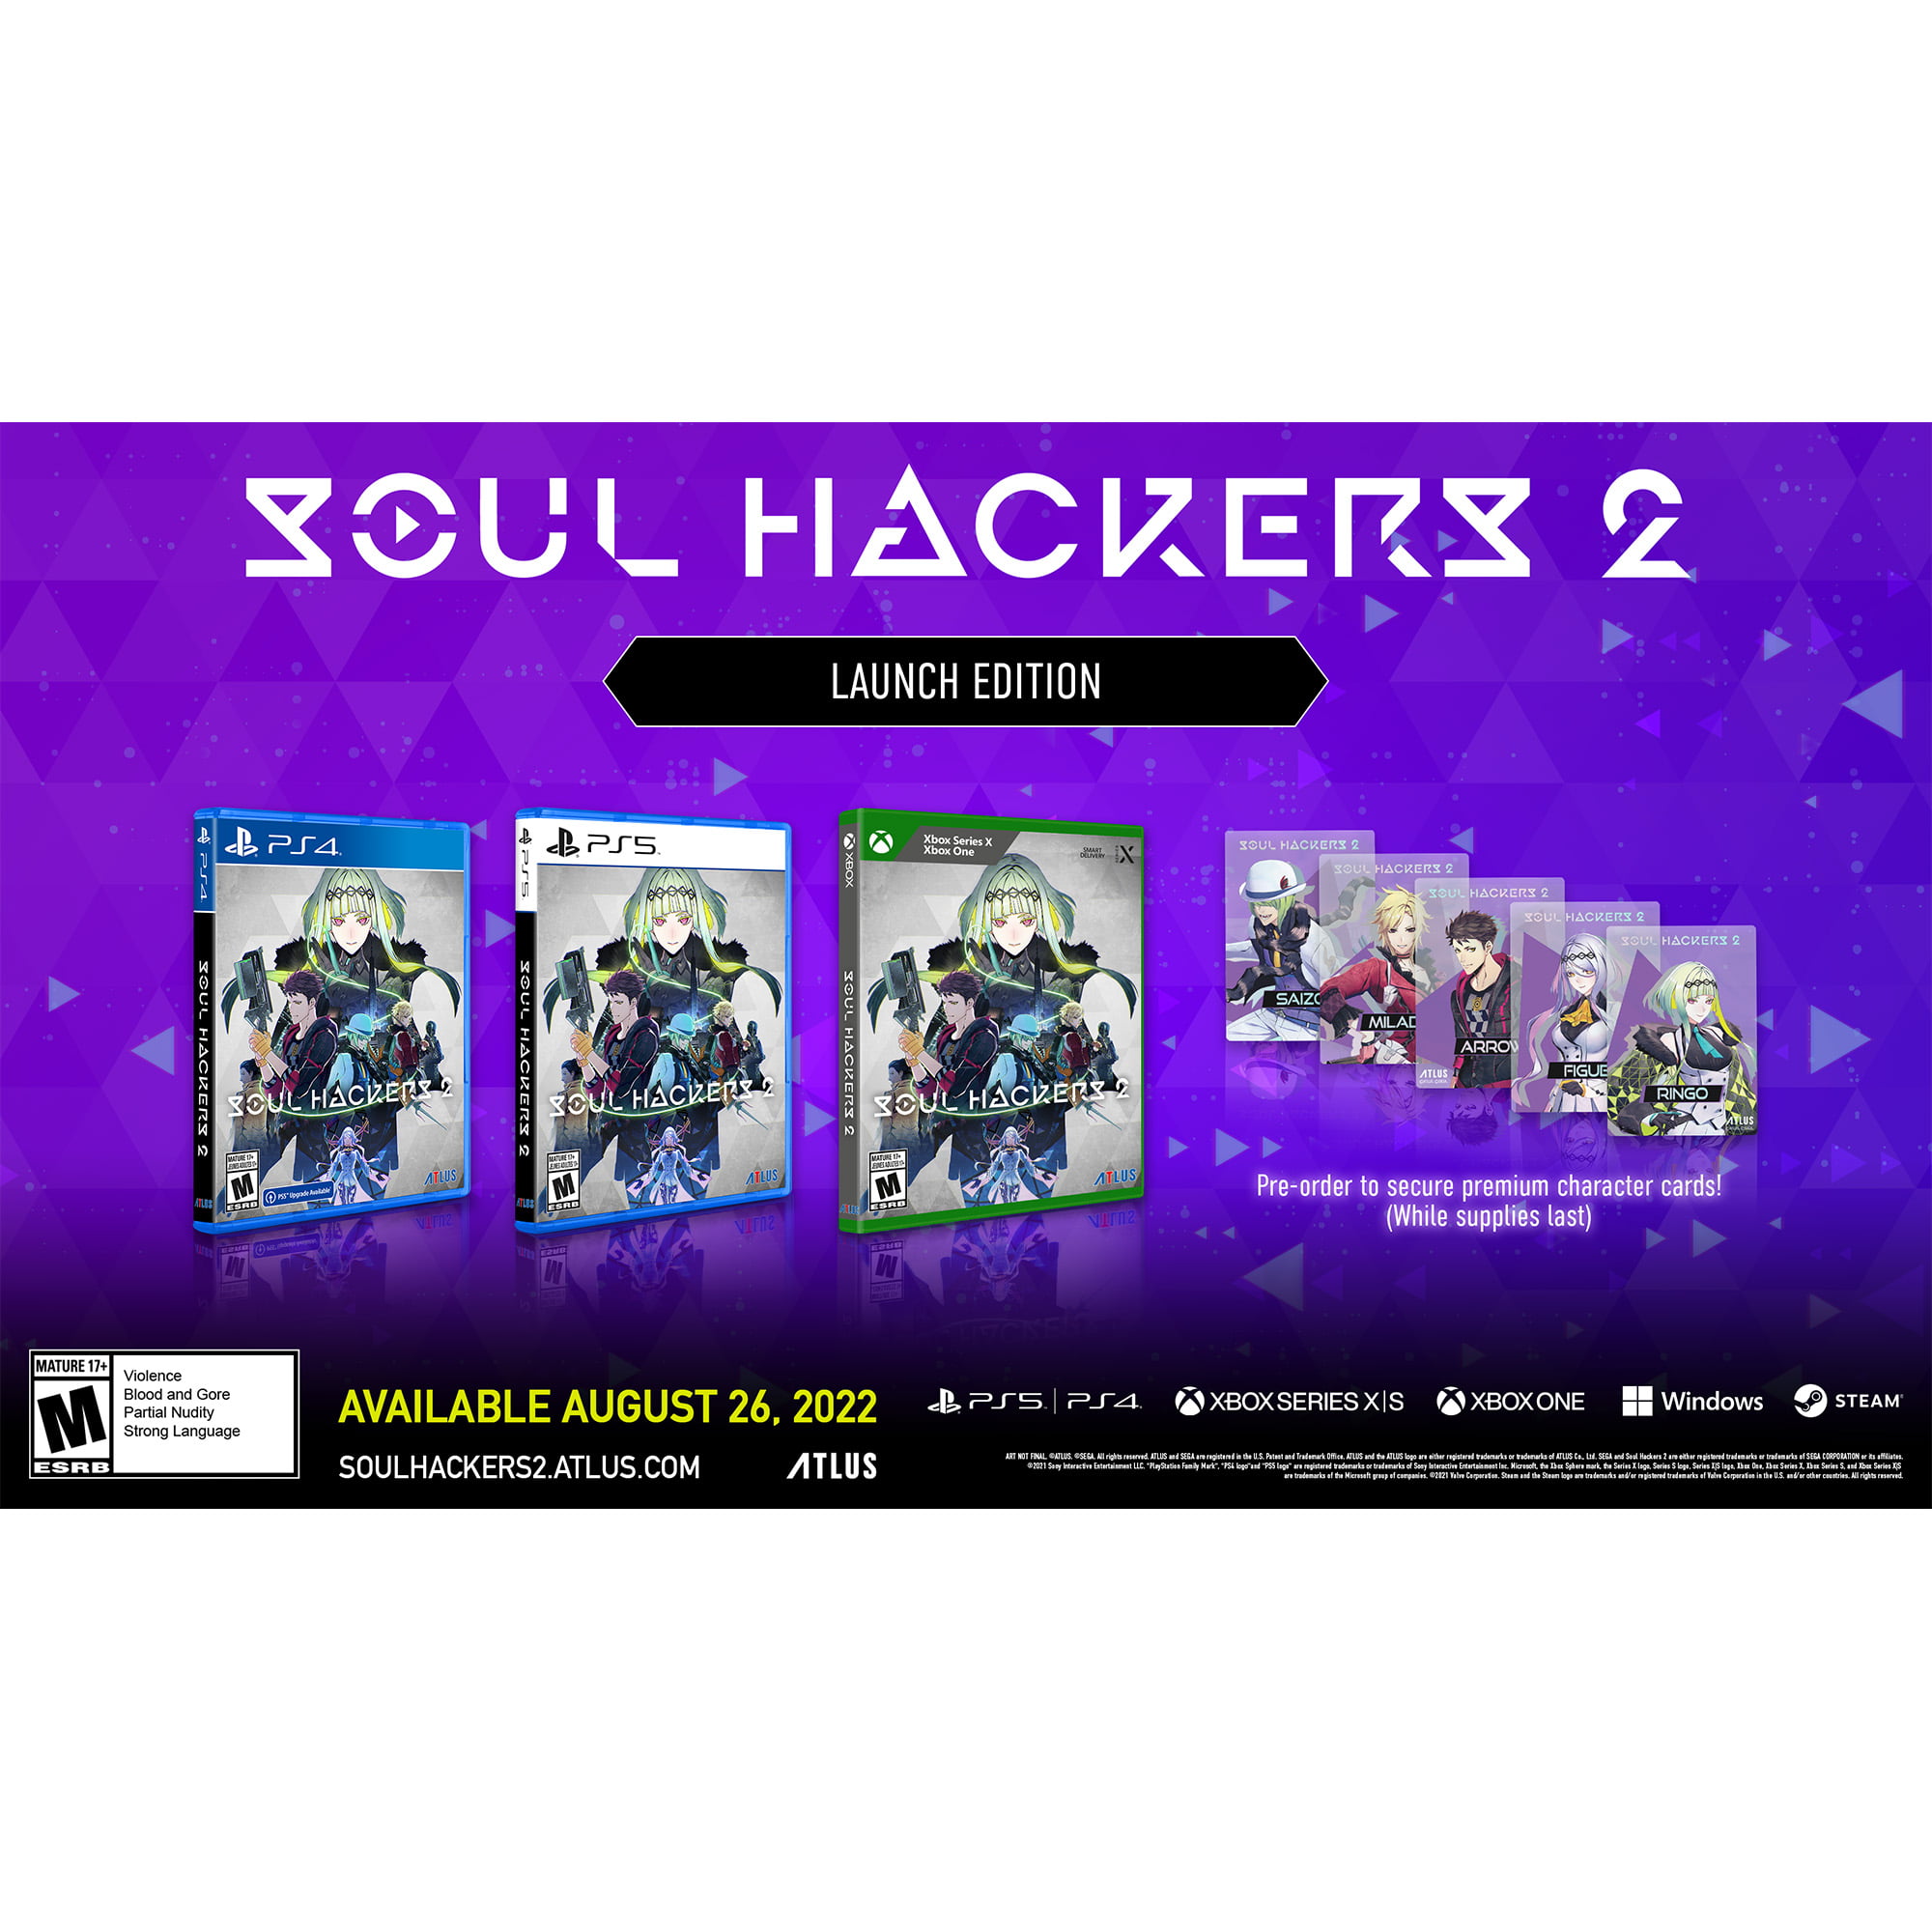 Klobrille on X: Soul Hackers 2 is coming to Xbox Game Pass